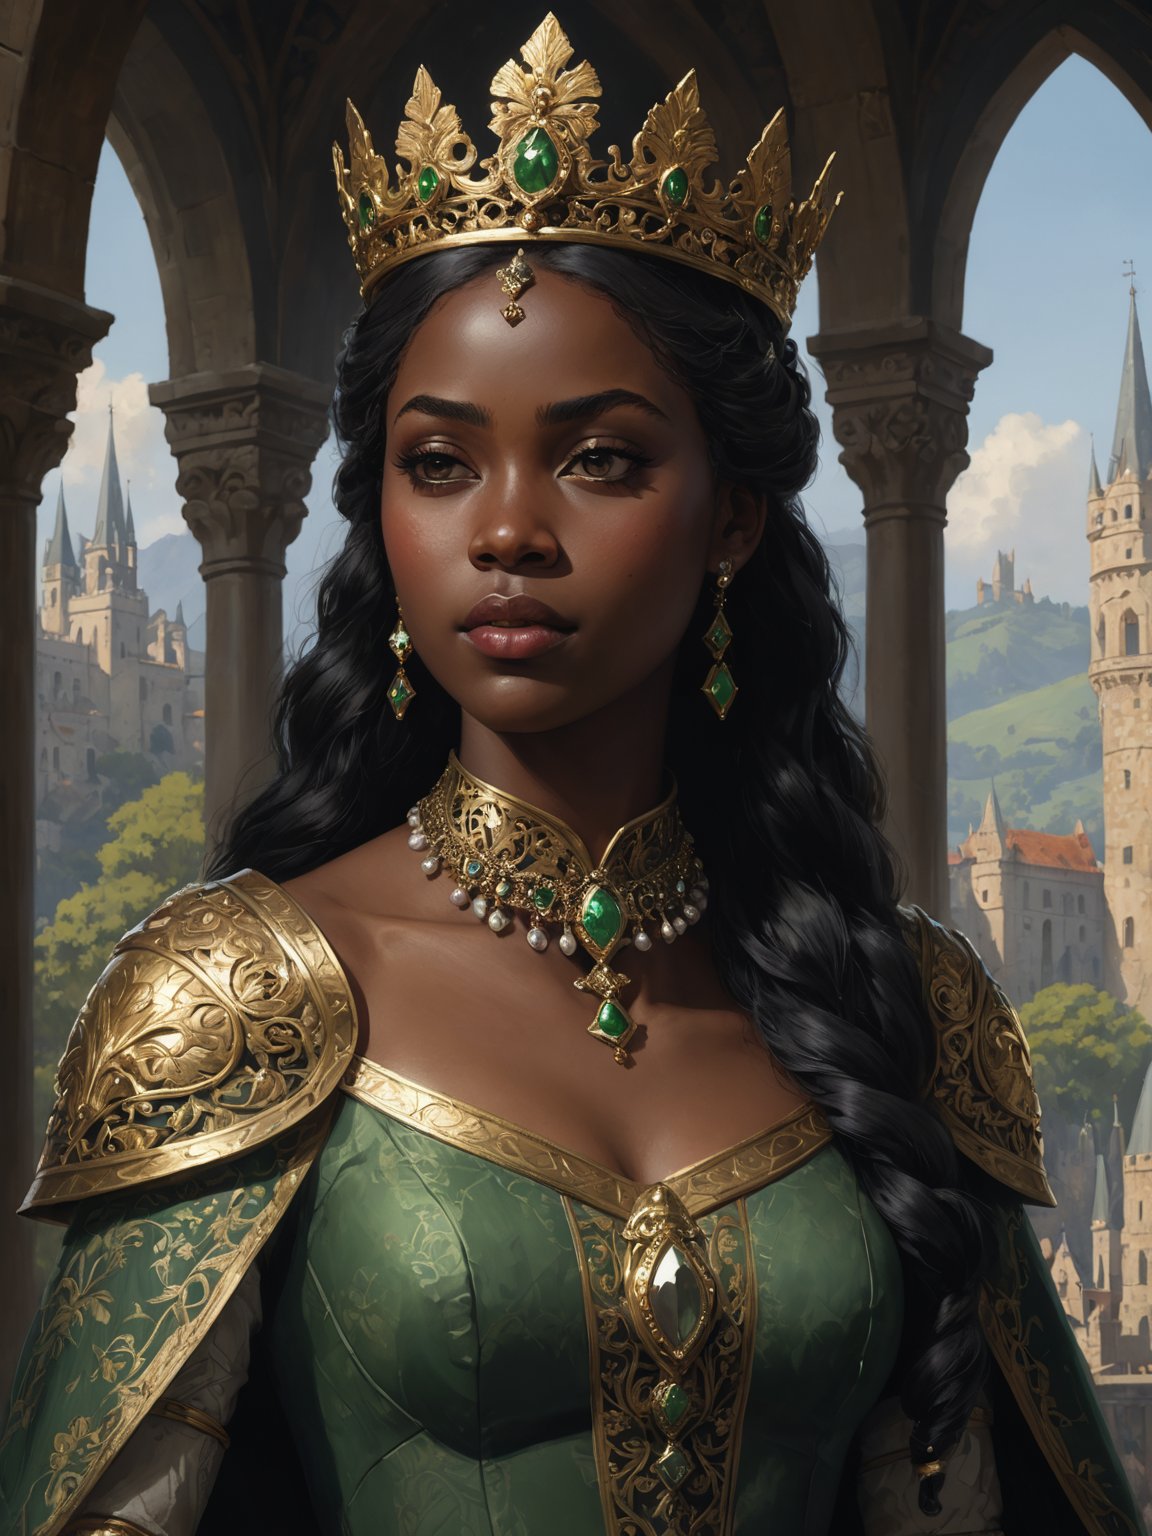 modelshoot style, (extremely detailed CG unity 8k wallpaper), full shot body photo of the most beautiful artwork in the world, medieval queen, green vale, dark skin, black woman, dark skin, golden crown, diamonds, medieval architecture, professional majestic oil painting by Ed Blinkey, Atey Ghailan, Studio Ghibli, by Jeremy Mann, Greg Manchess, Antonio Moro, trending on ArtStation, trending on CGSociety, Intricate, High Detail, Sharp focus, dramatic, photorealistic painting art by midjourney and greg rutkowski